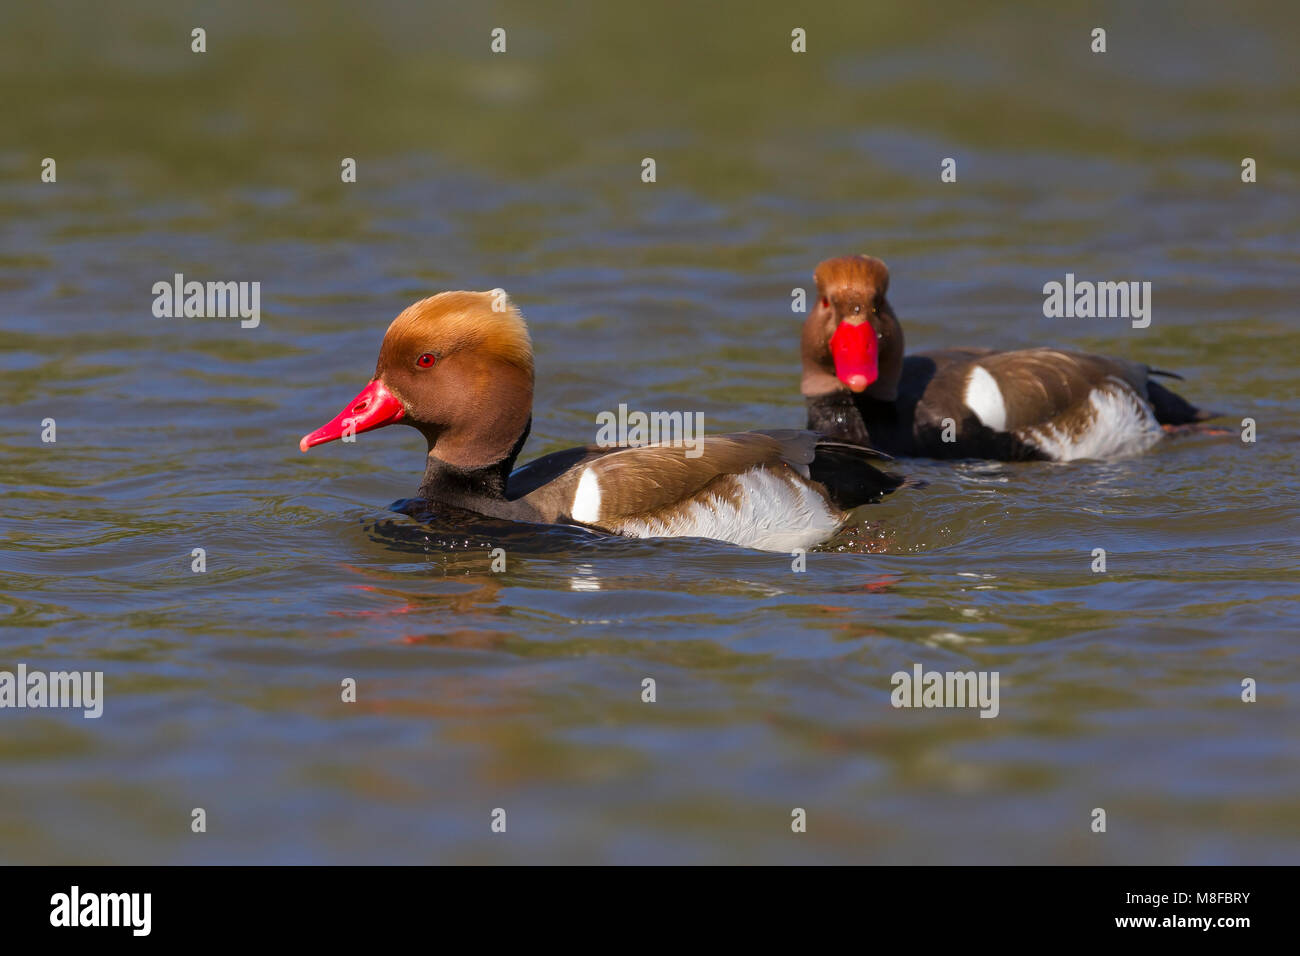 Mannetje Krooneend, Red-crested Pochard male Stock Photo